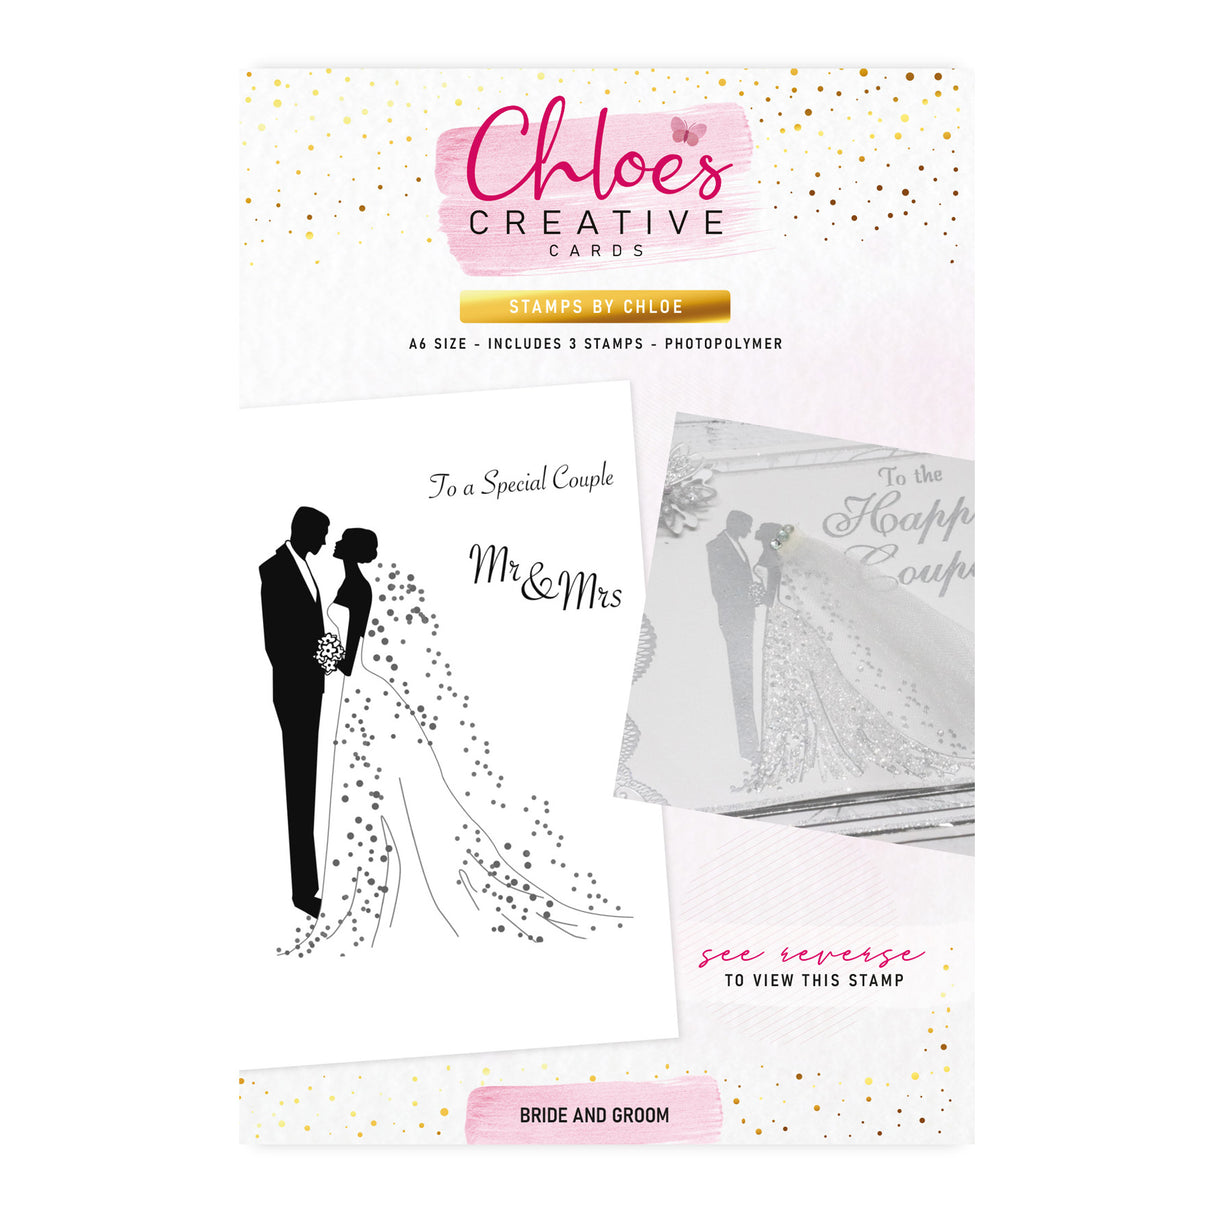 Chloes Creative Cards Photopolymer Stamp Set (A6) - Bride and Groom